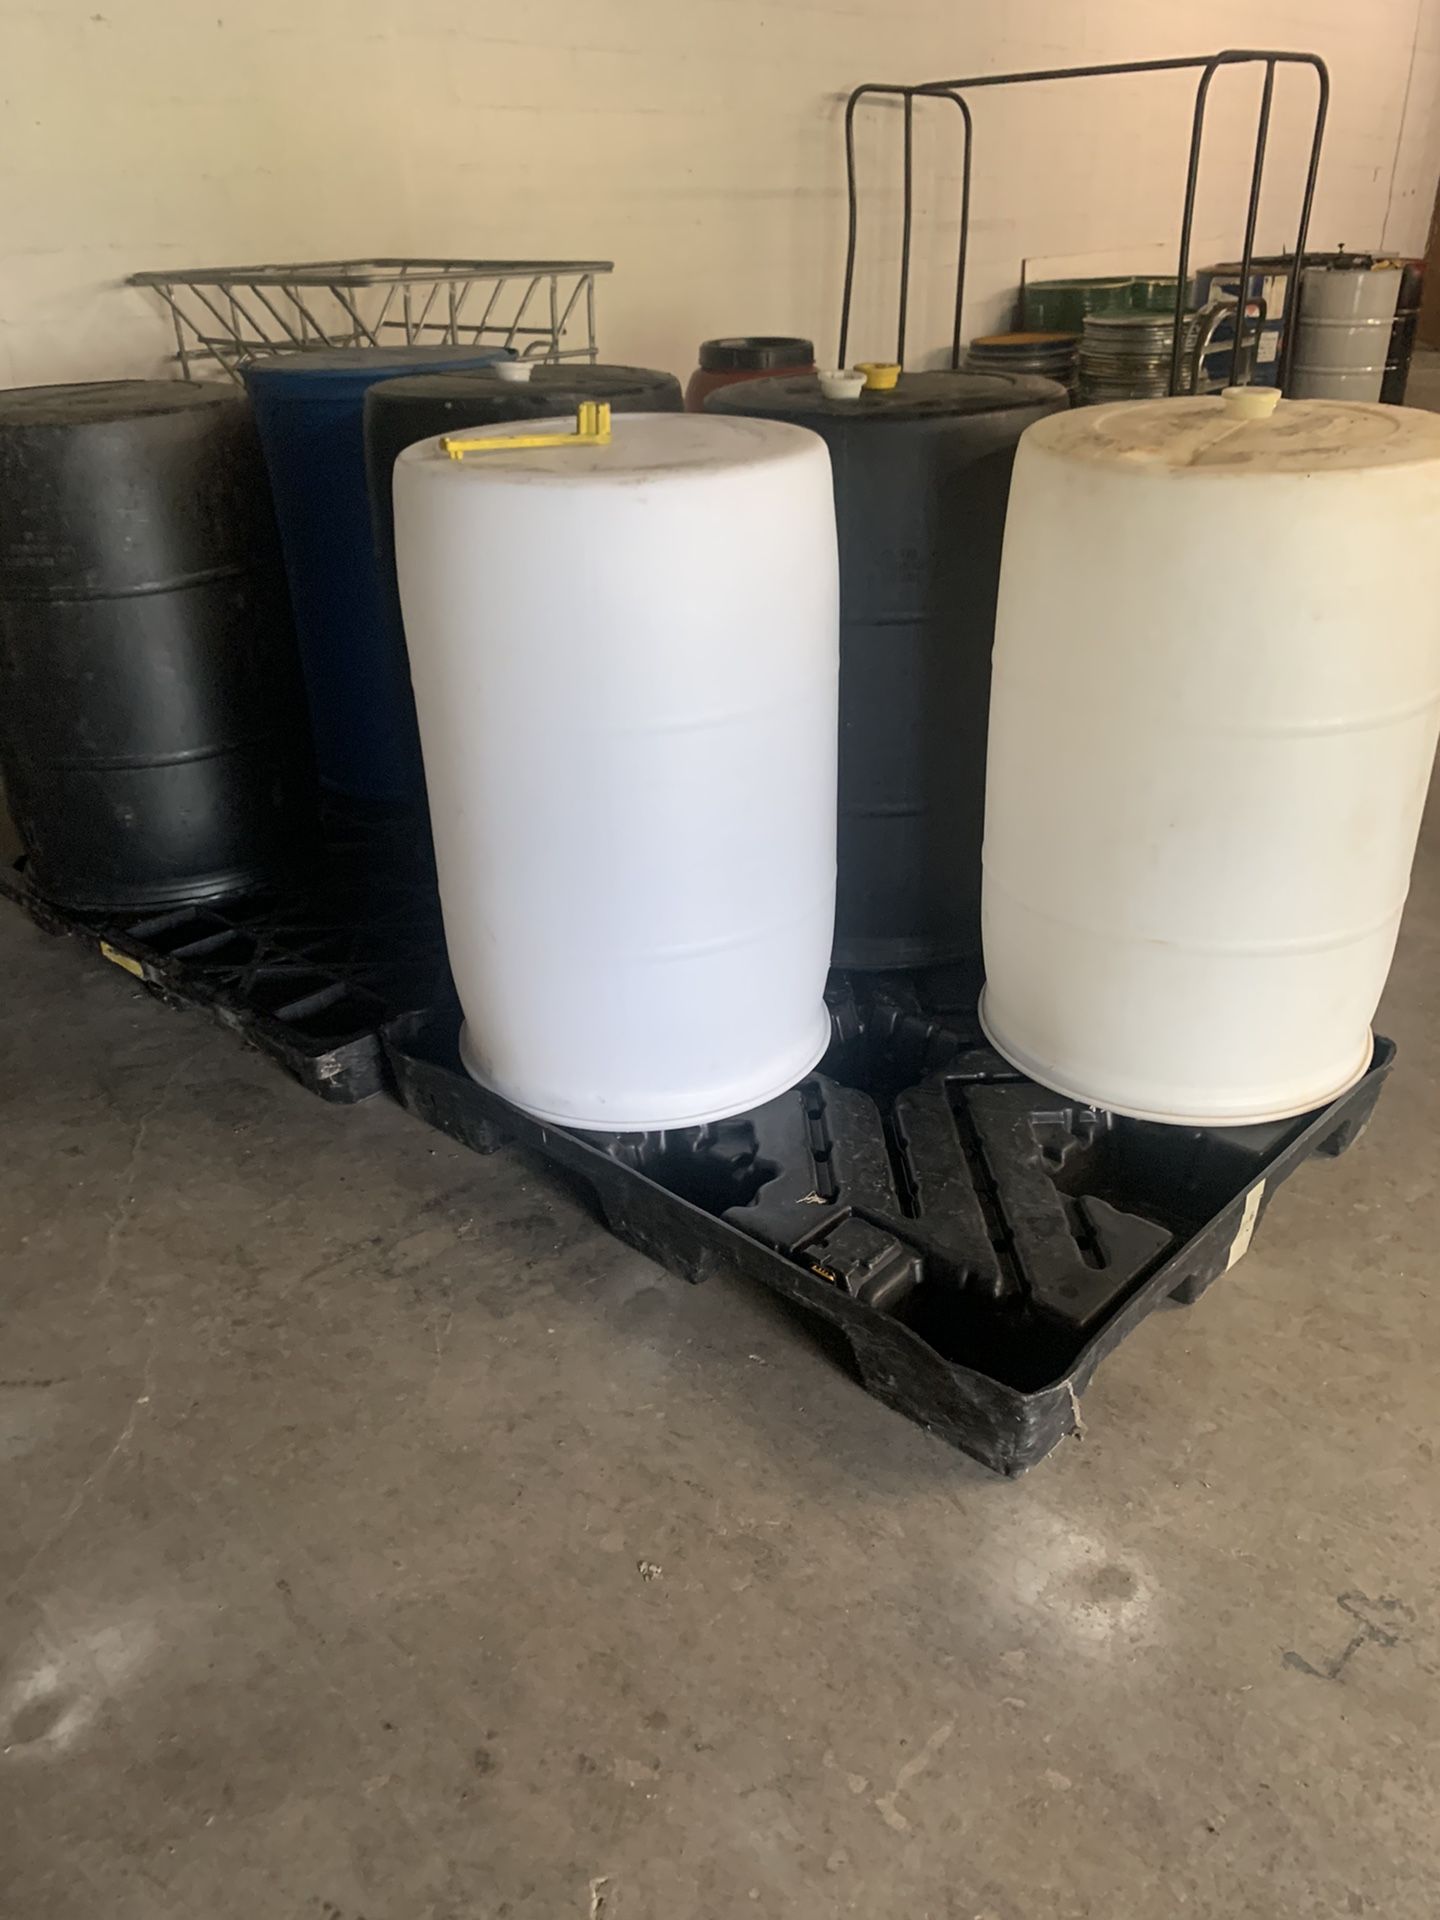 55 gallon sealed barrels ni lid closed empty clean food grade , water, storage, shipping,rain barrels, floating docks , planters, Tracy cans tie down